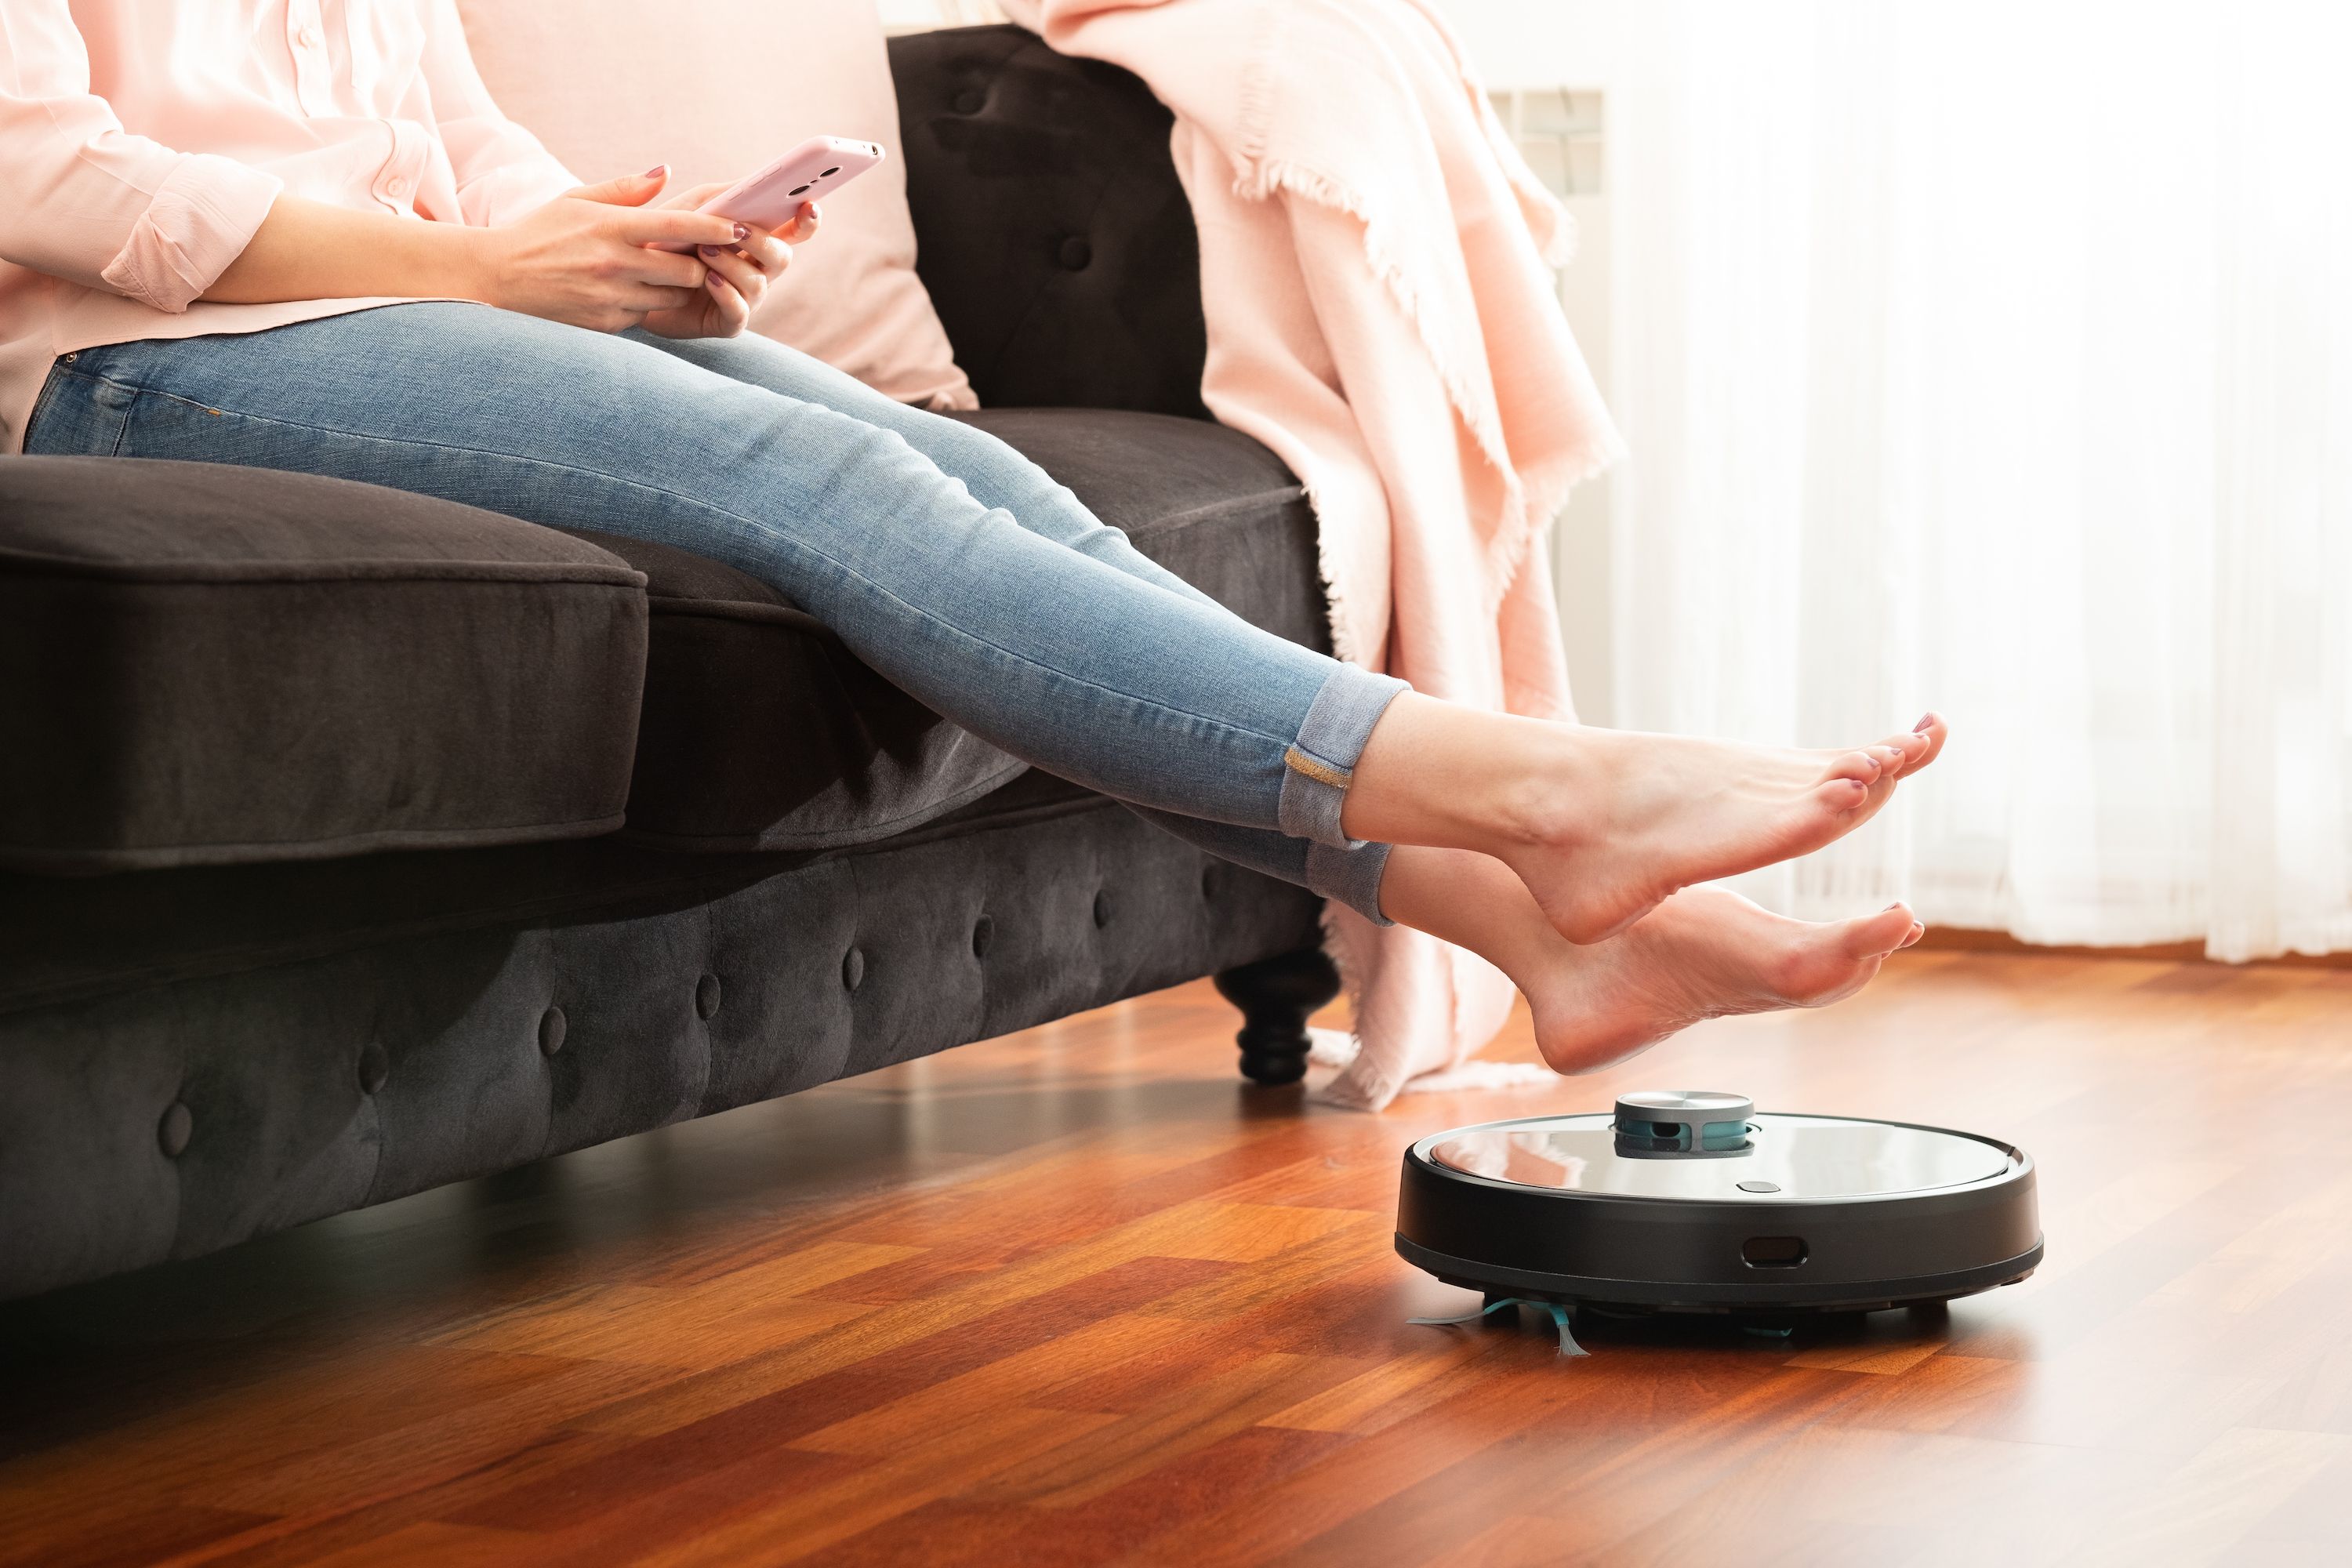 Roborock's Q5 robot vacuum cleaner falls $190 to new $240 low with an  option to upgrade